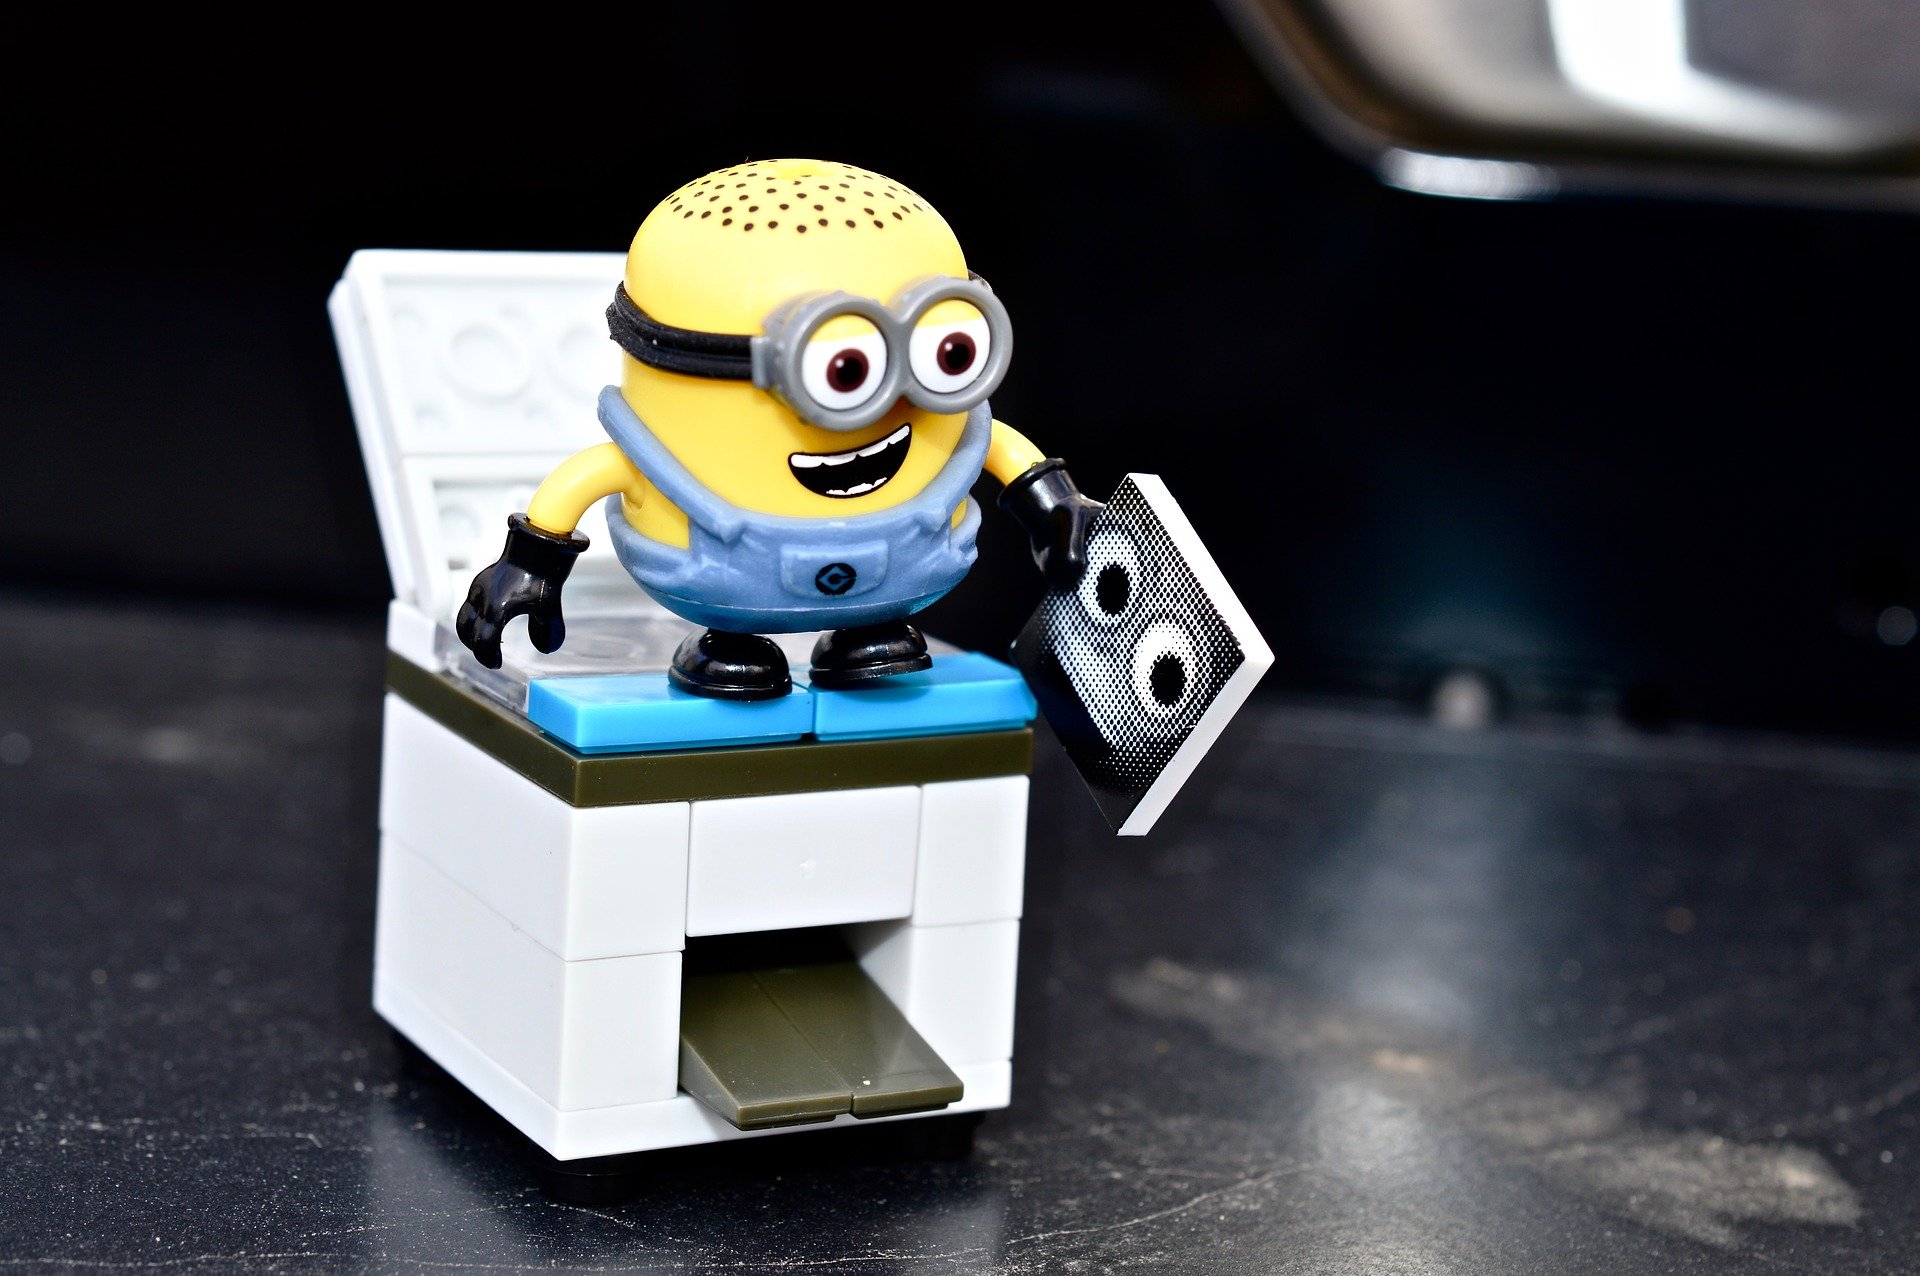 A Lego Minion using a photocopier with a copy of their face in hand.